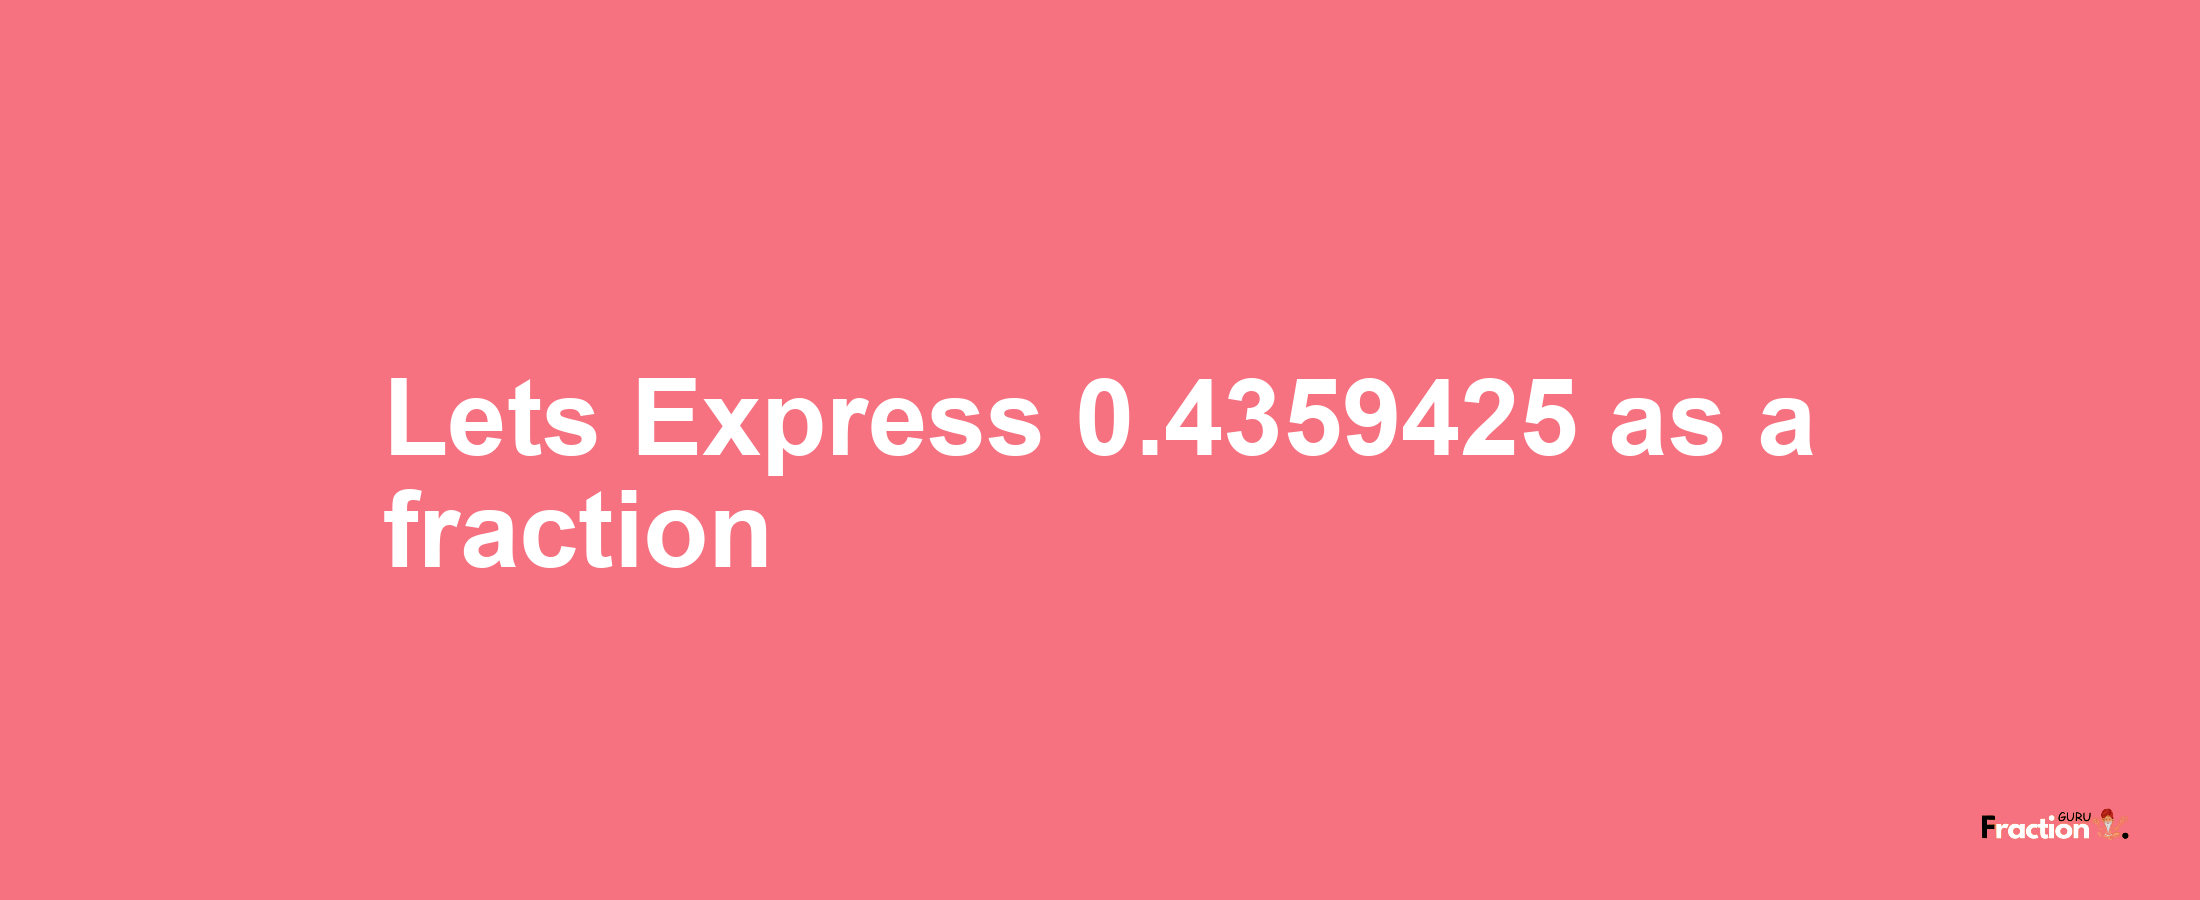 Lets Express 0.4359425 as afraction